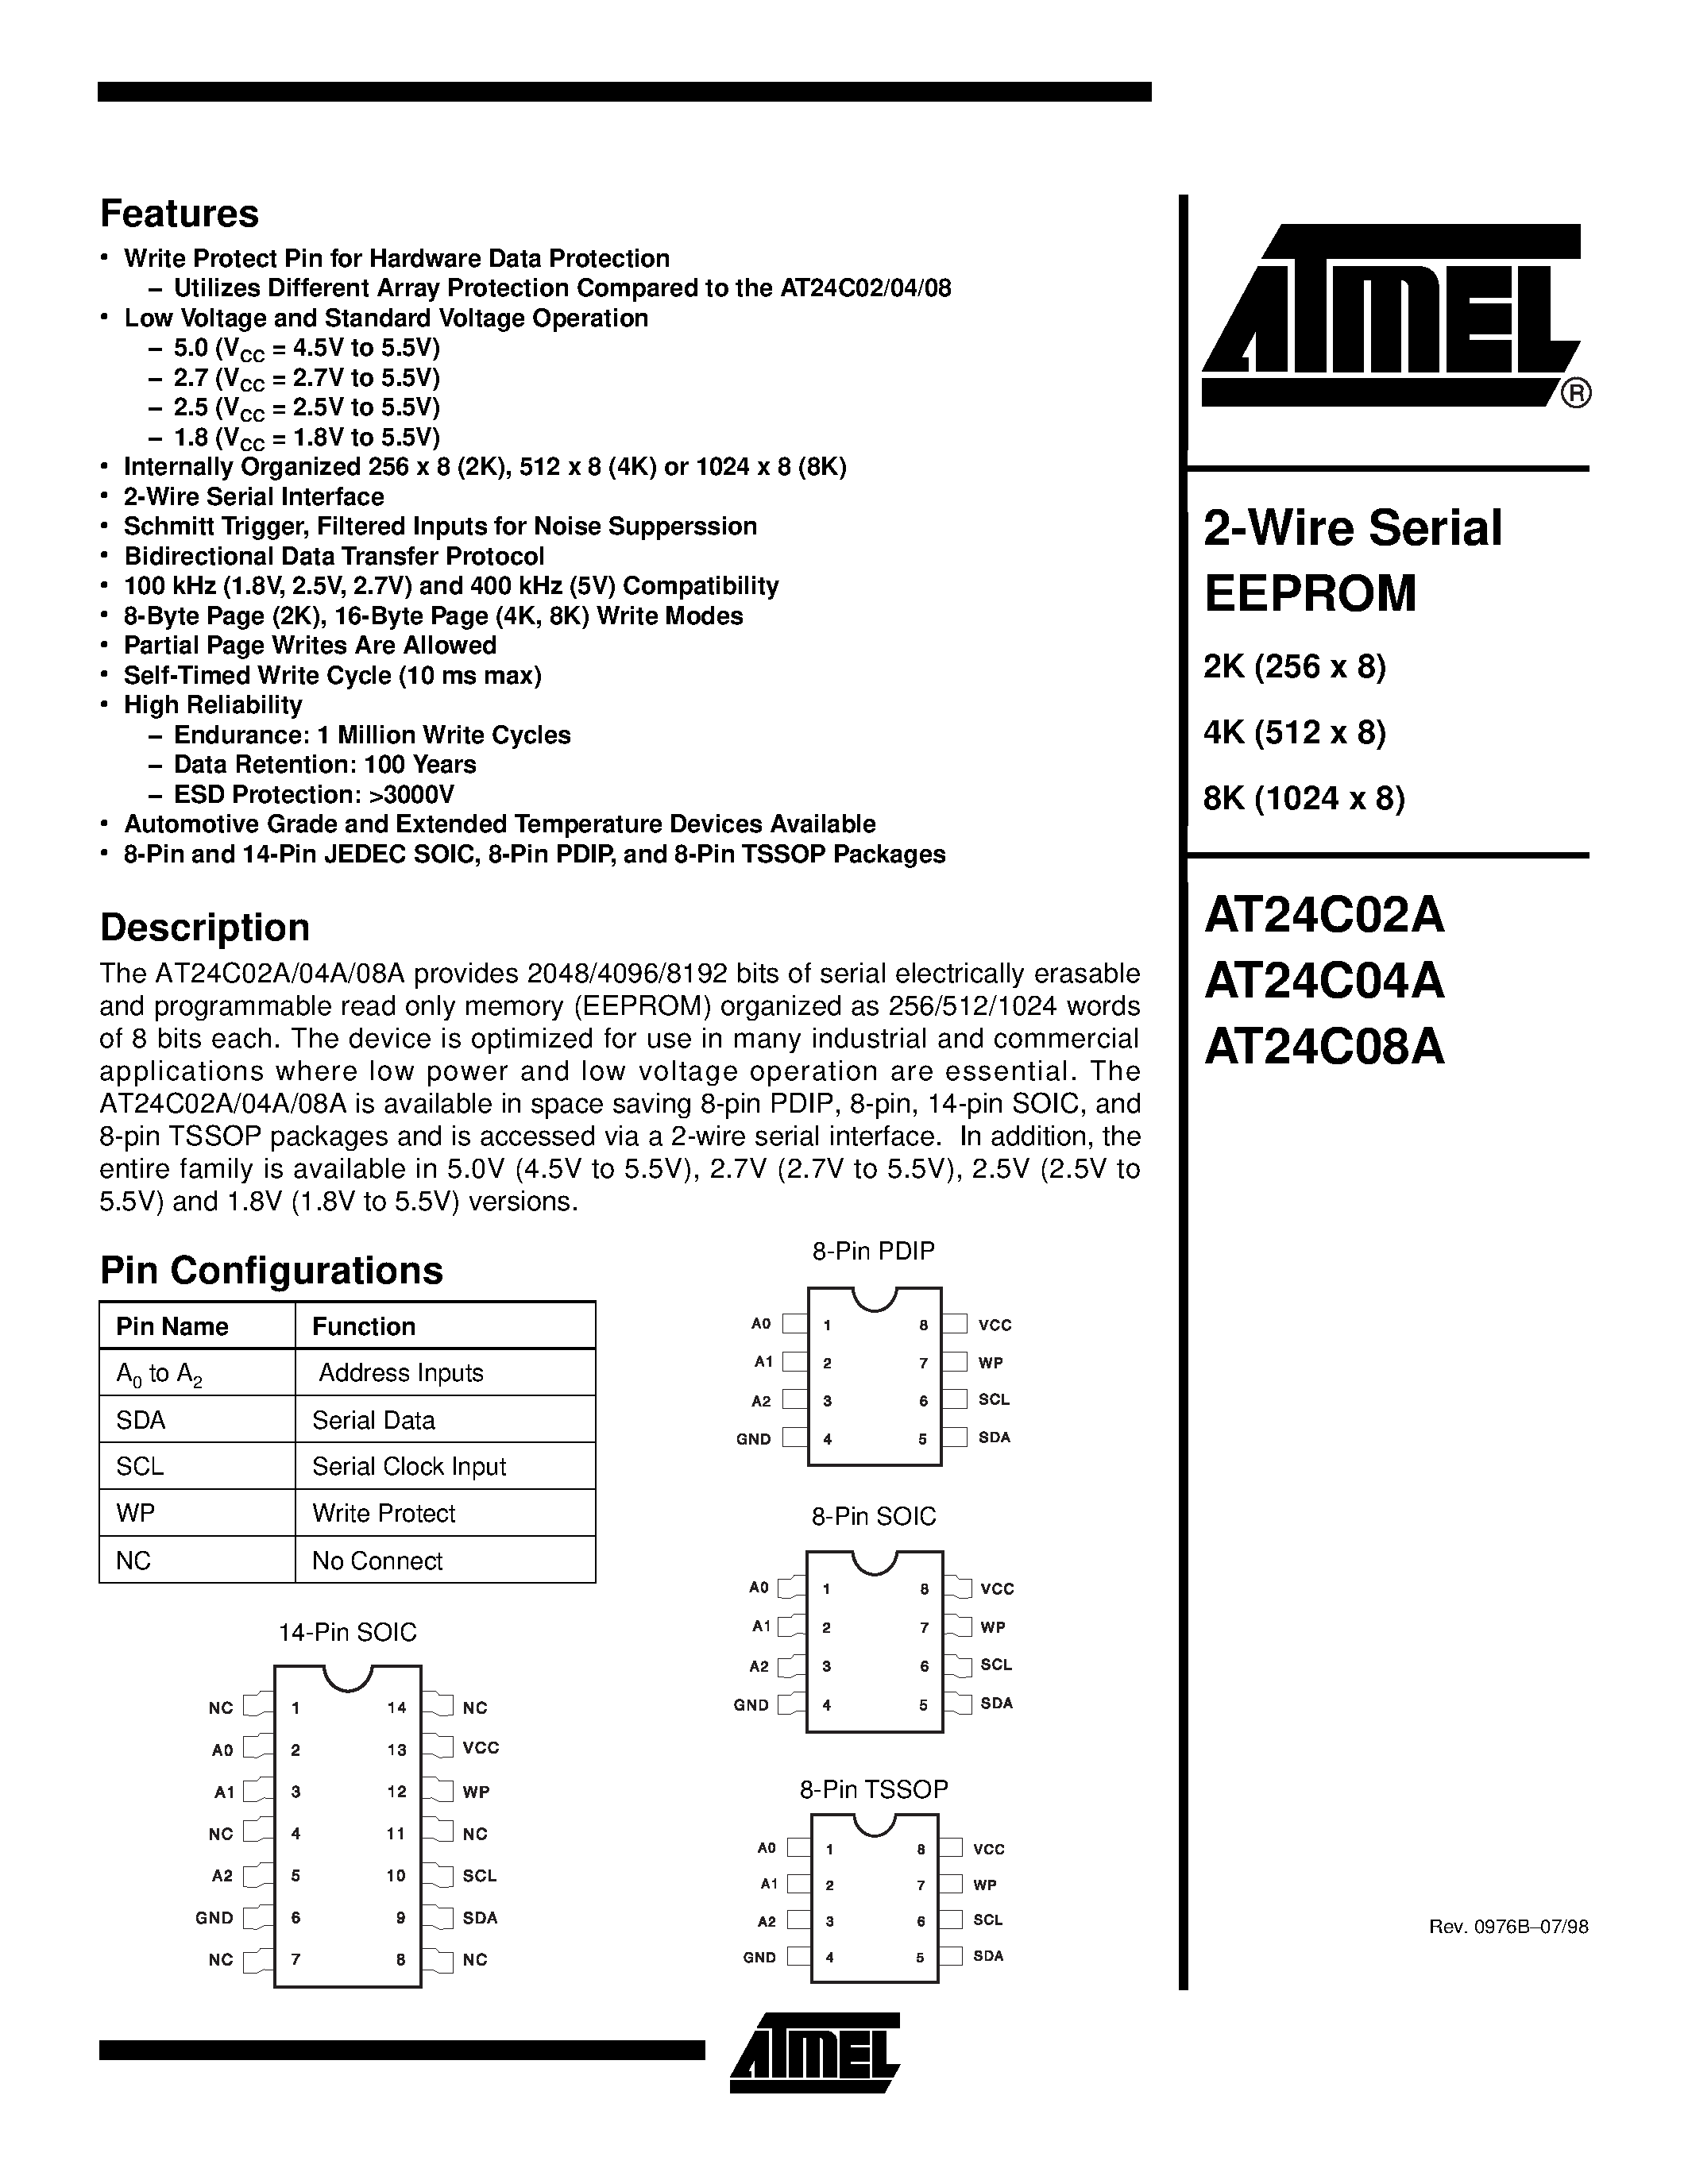 Datasheet AT24C08A-10TI-2.5 - 2-Wire Serial EEPROM page 1